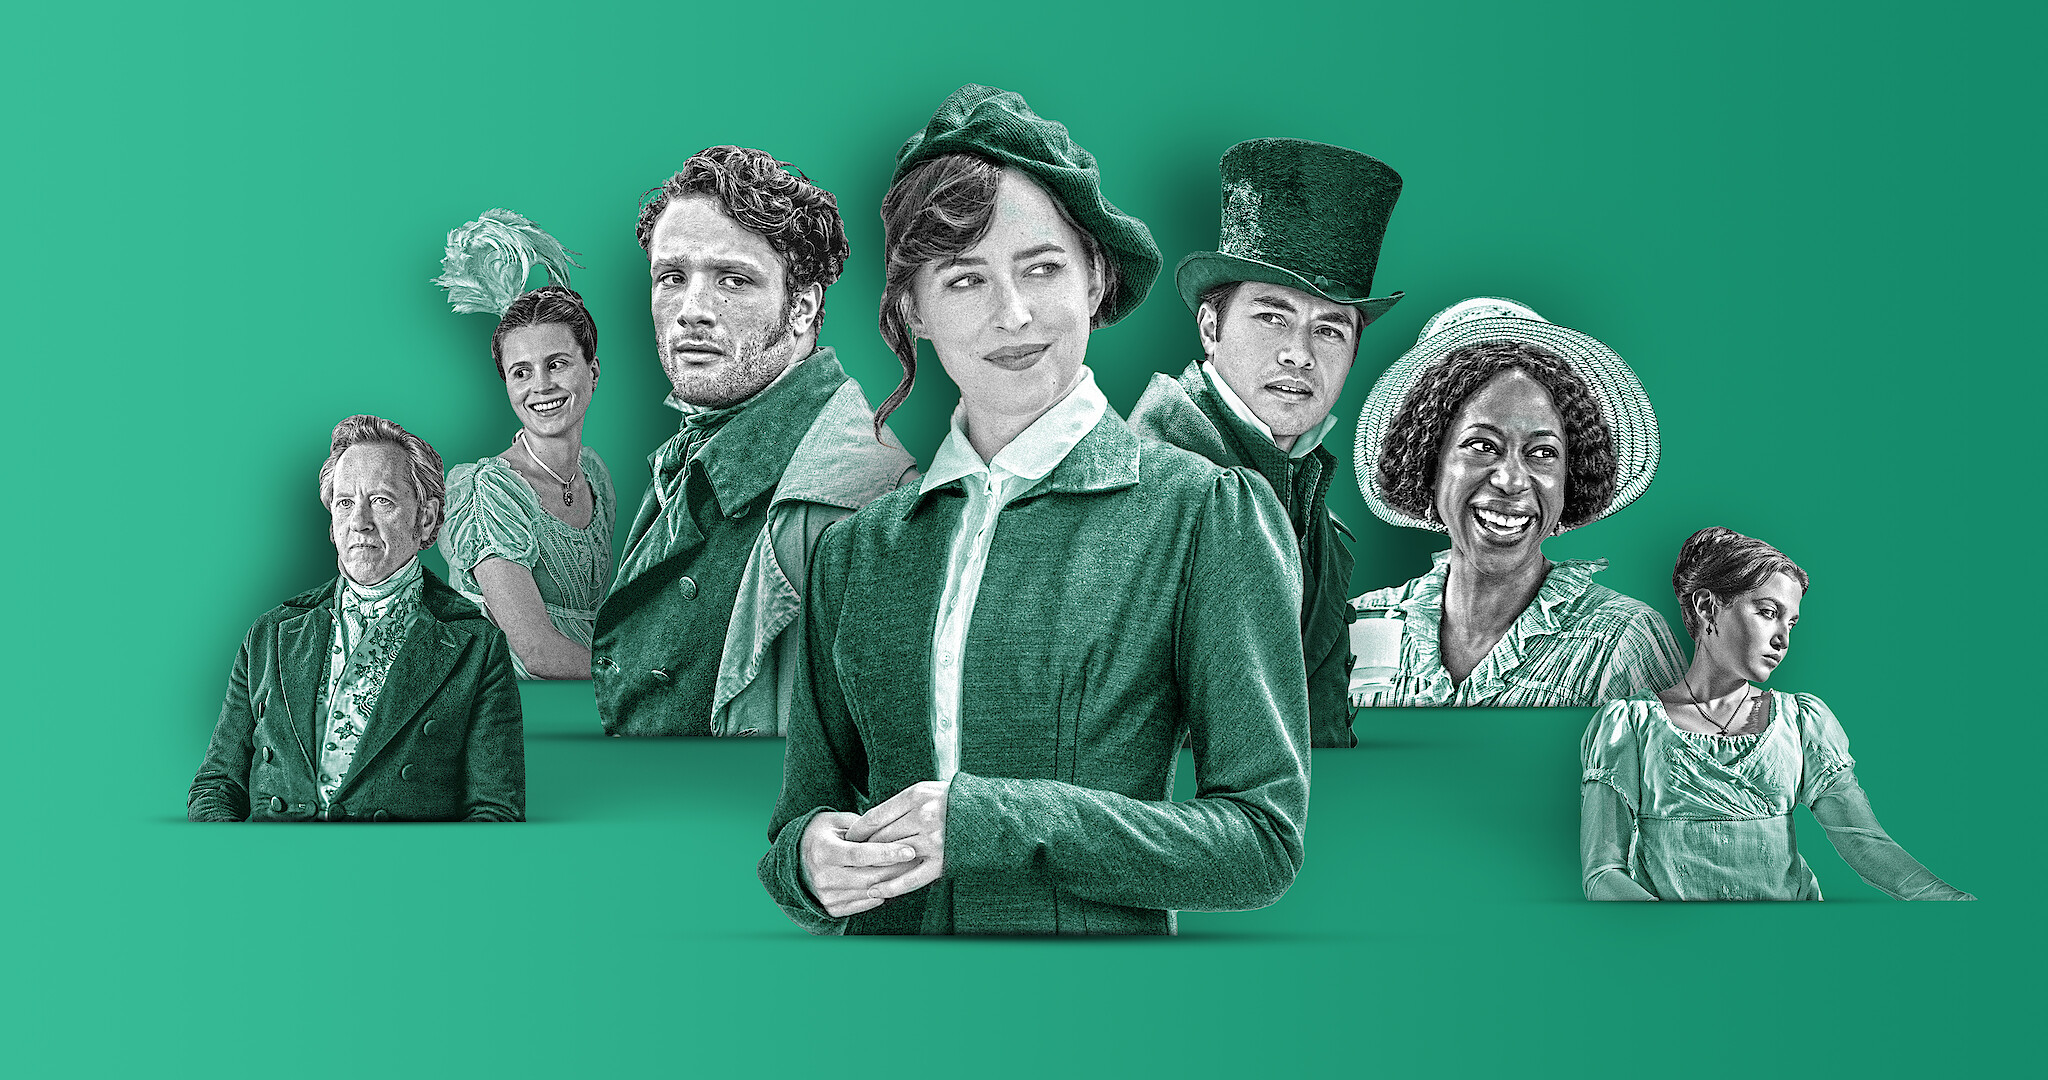 Whos Who In Persuasion? Cast Guide to Netflix Jane Austen Movie image